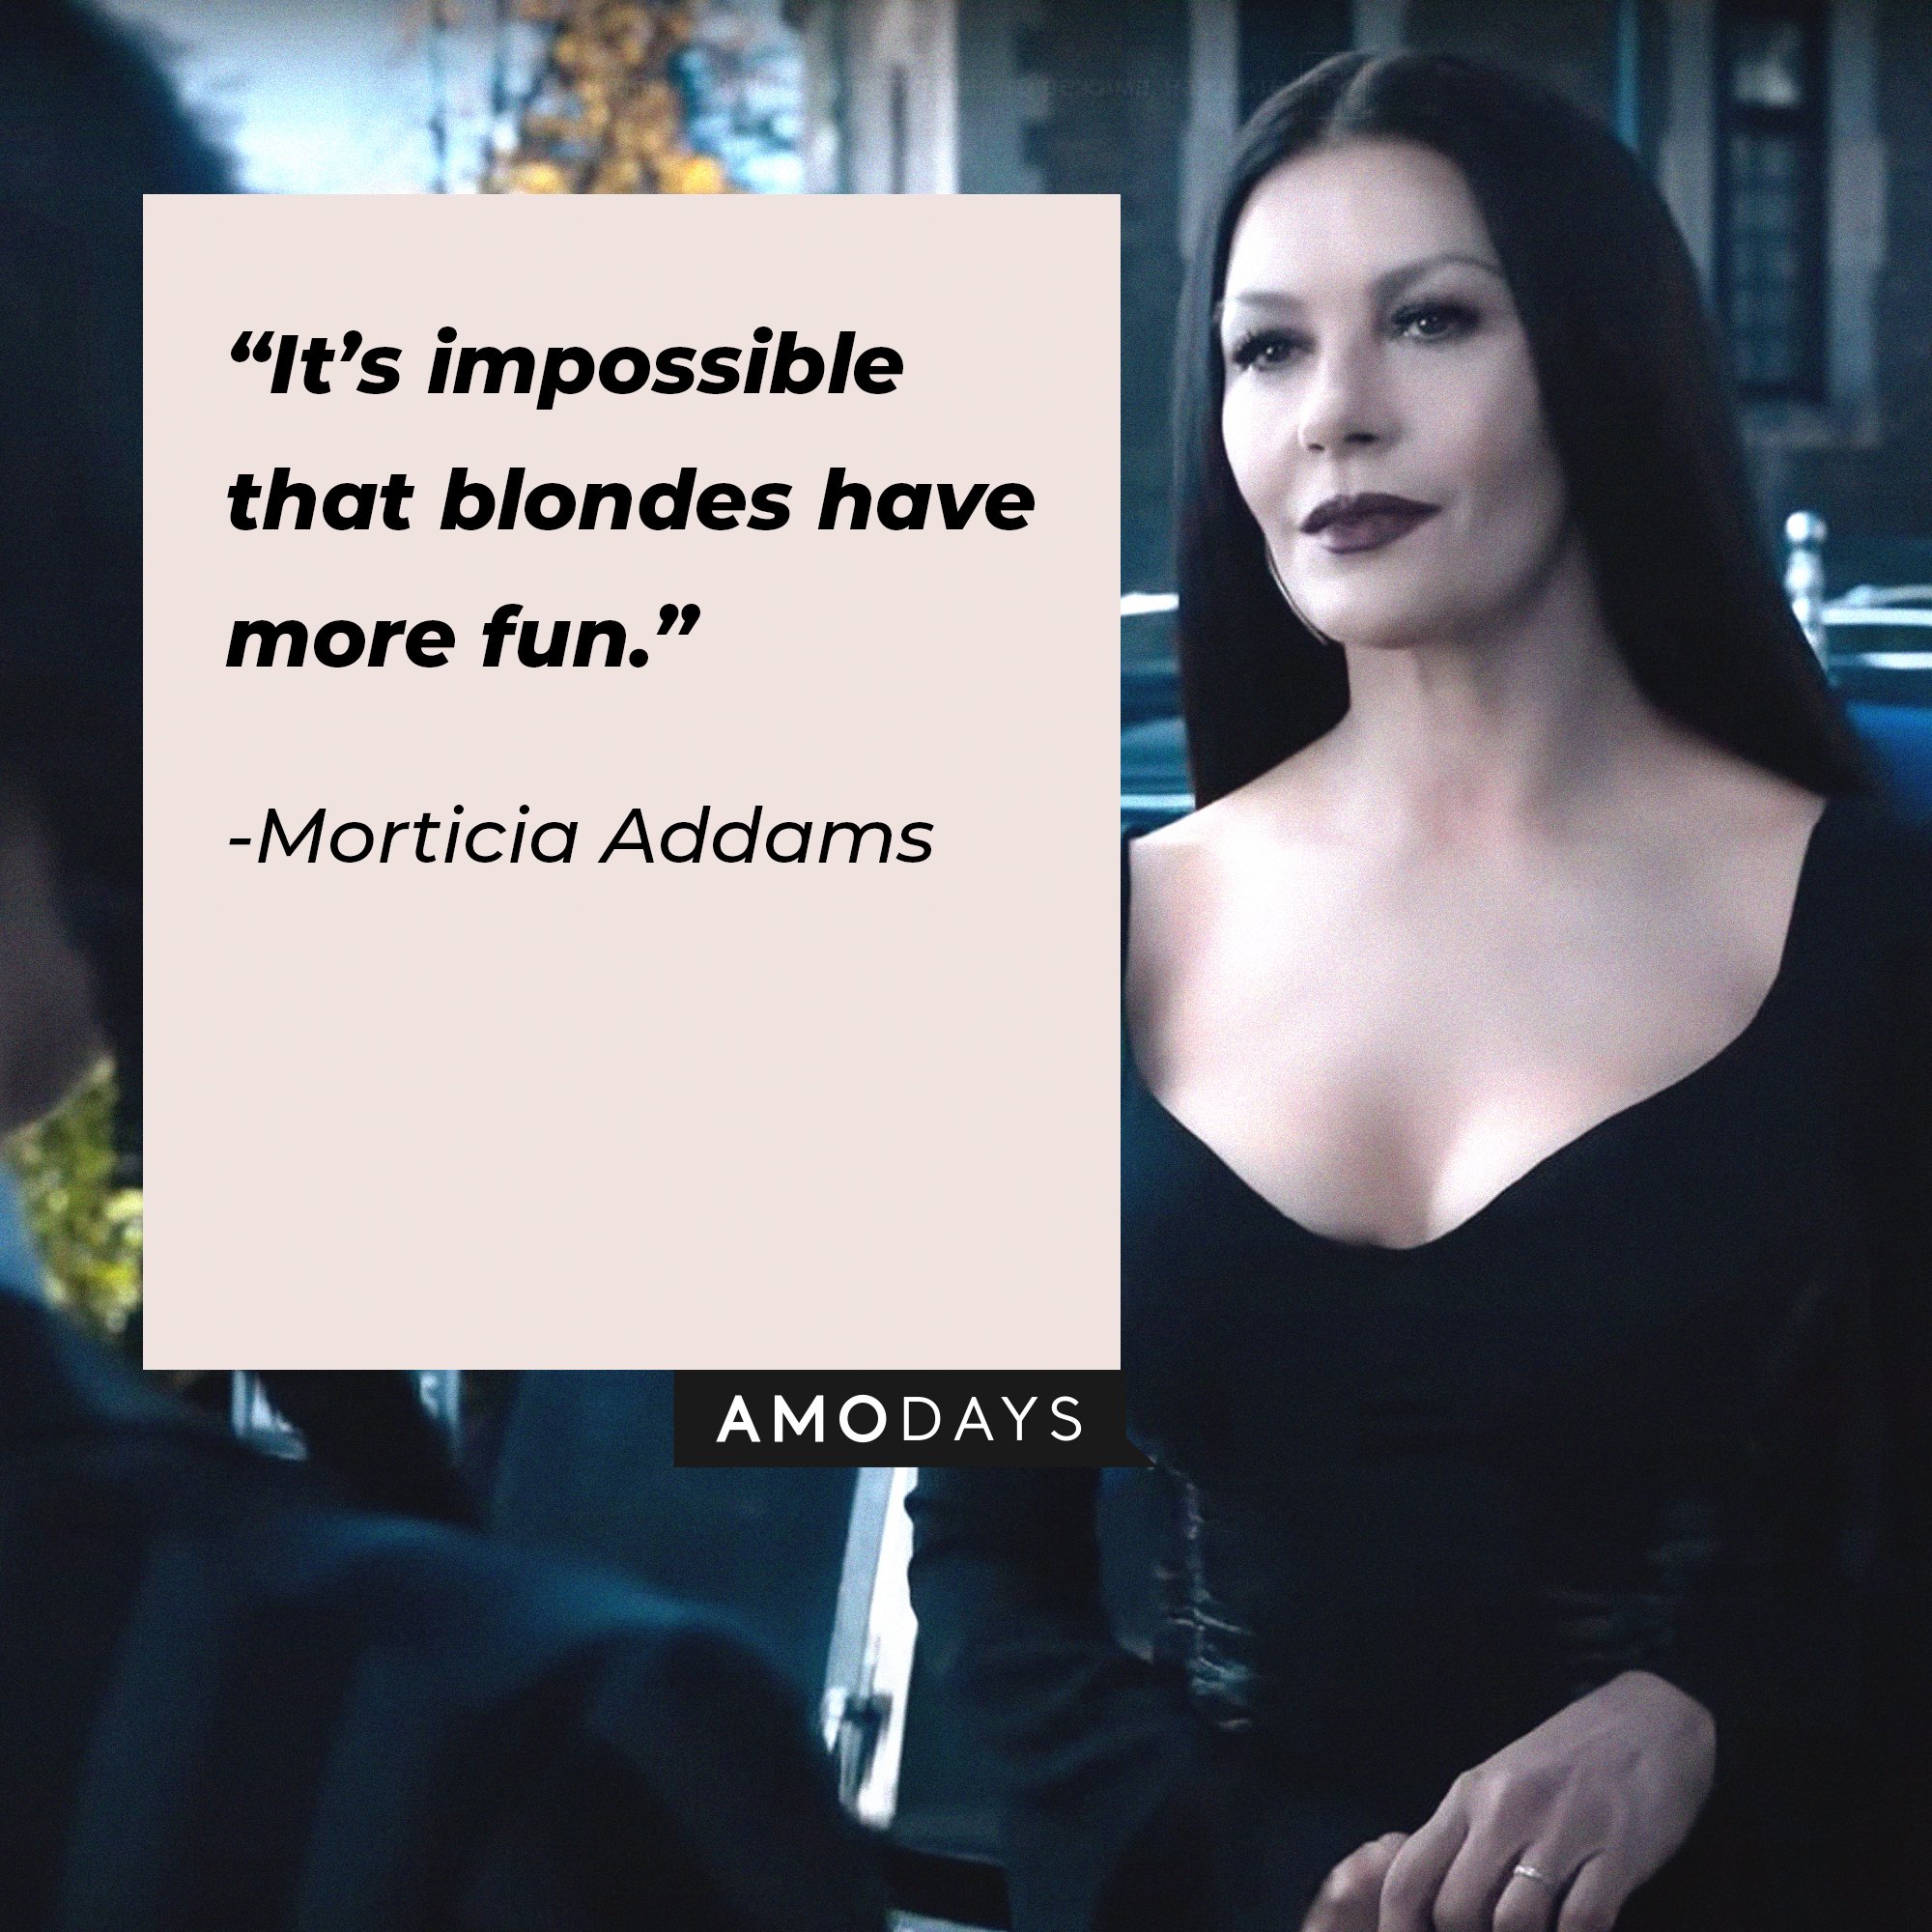 Morticia Addams’s quote: “It’s impossible that blondes have more fun.” | Image: AmoDays